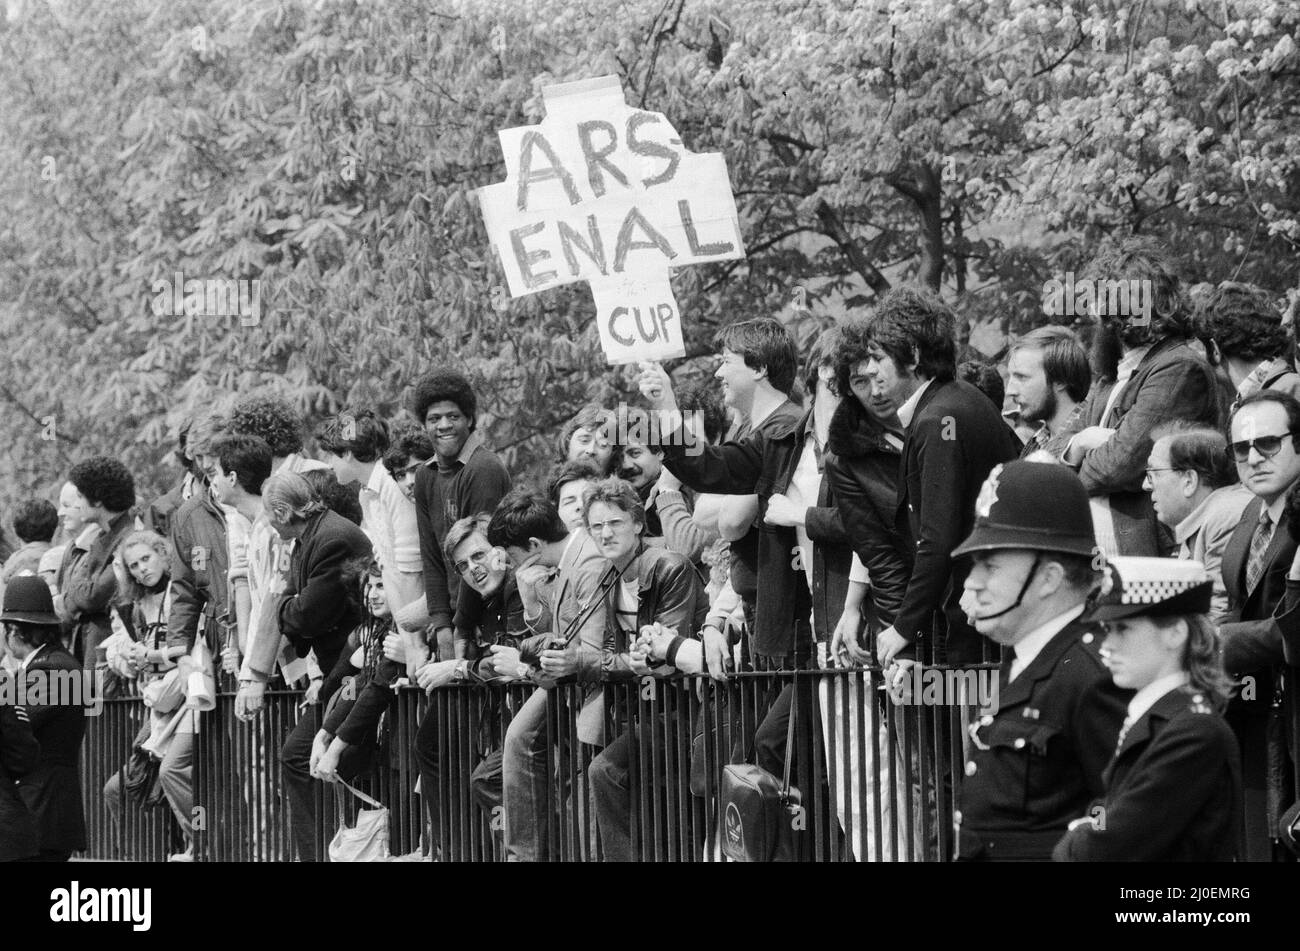 Second day of the Iranian Embassy Siege in London where six gunmen of the Iranian extremist group 'Democratic Revolutionary Movement for the Liberation of Arabistan' stormed the building, taking 26 hostages before the SAS retook the embassy and freed the hostages. Arsenal football supporters look on during demonstration by Ayatollah supporters outside the Embassy.  1st May 1980. Stock Photo